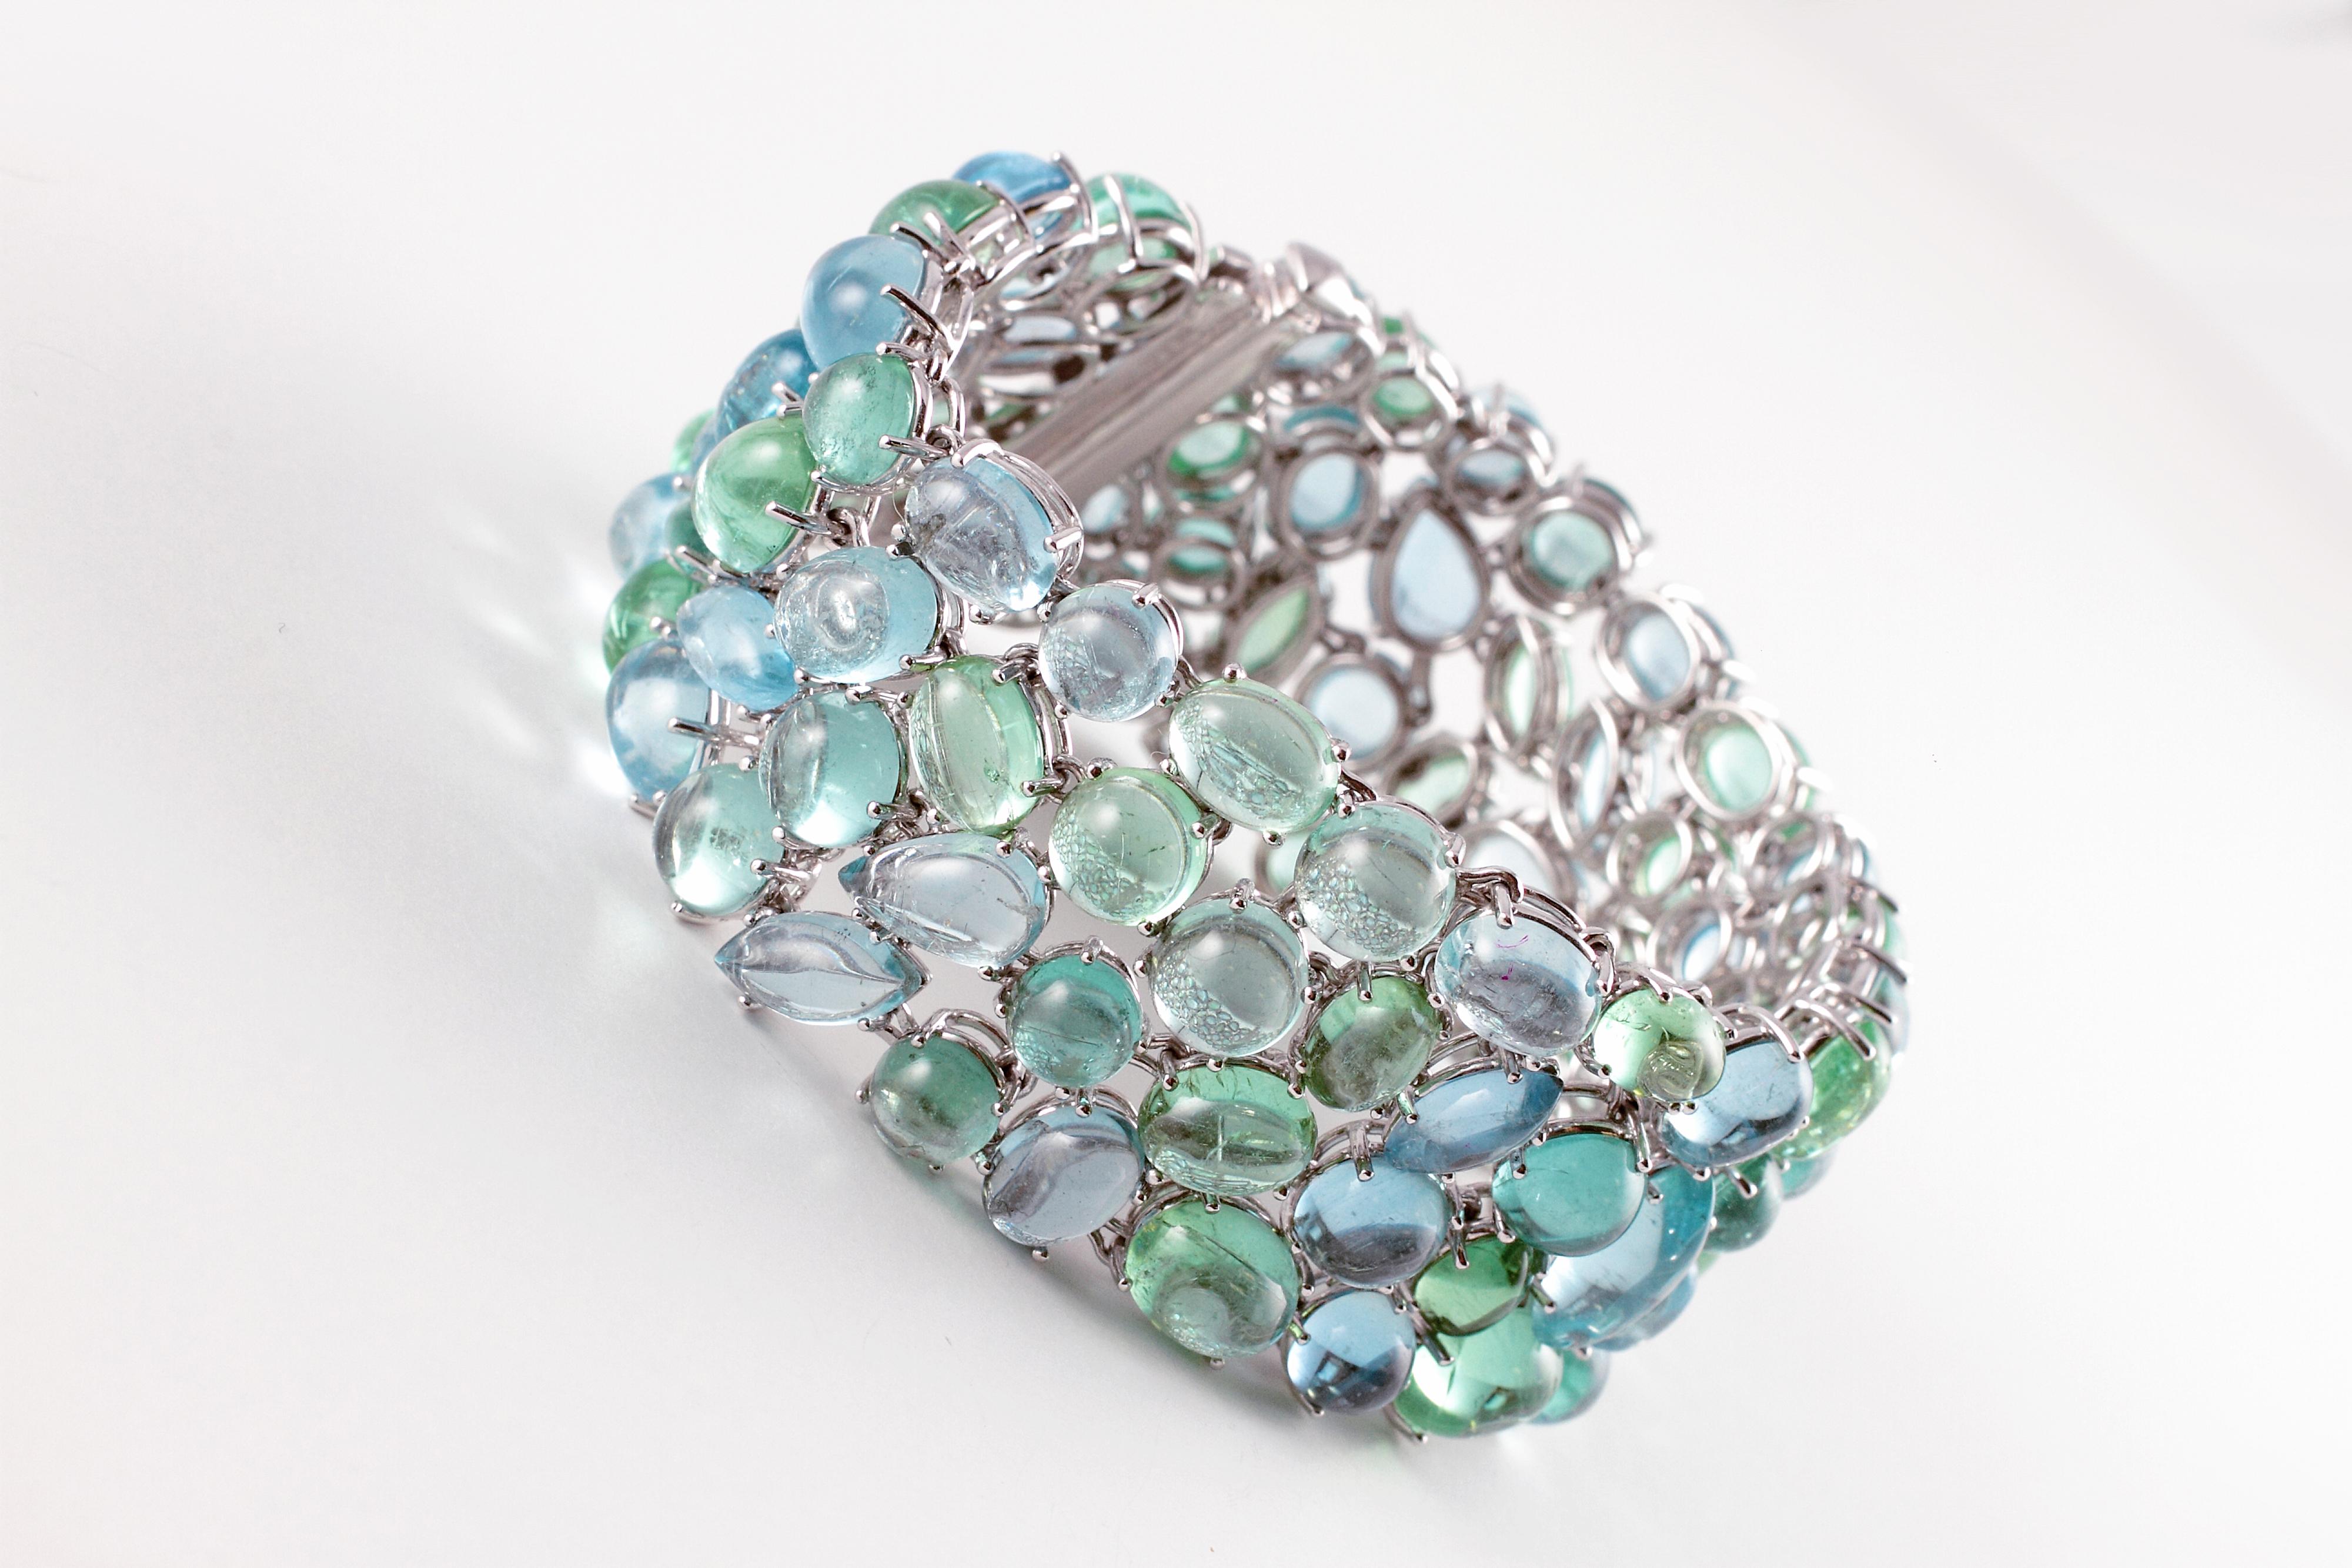 Don't you just love the soft greens and blues in this elegant bracelet by Robert Erich?  The oval-shaped cabochon-cut 52.35 carats of aquamarines complement the 65.13 carats of oval-shaped cabochon-cut tourmaline and the 0.65 cts of diamonds are